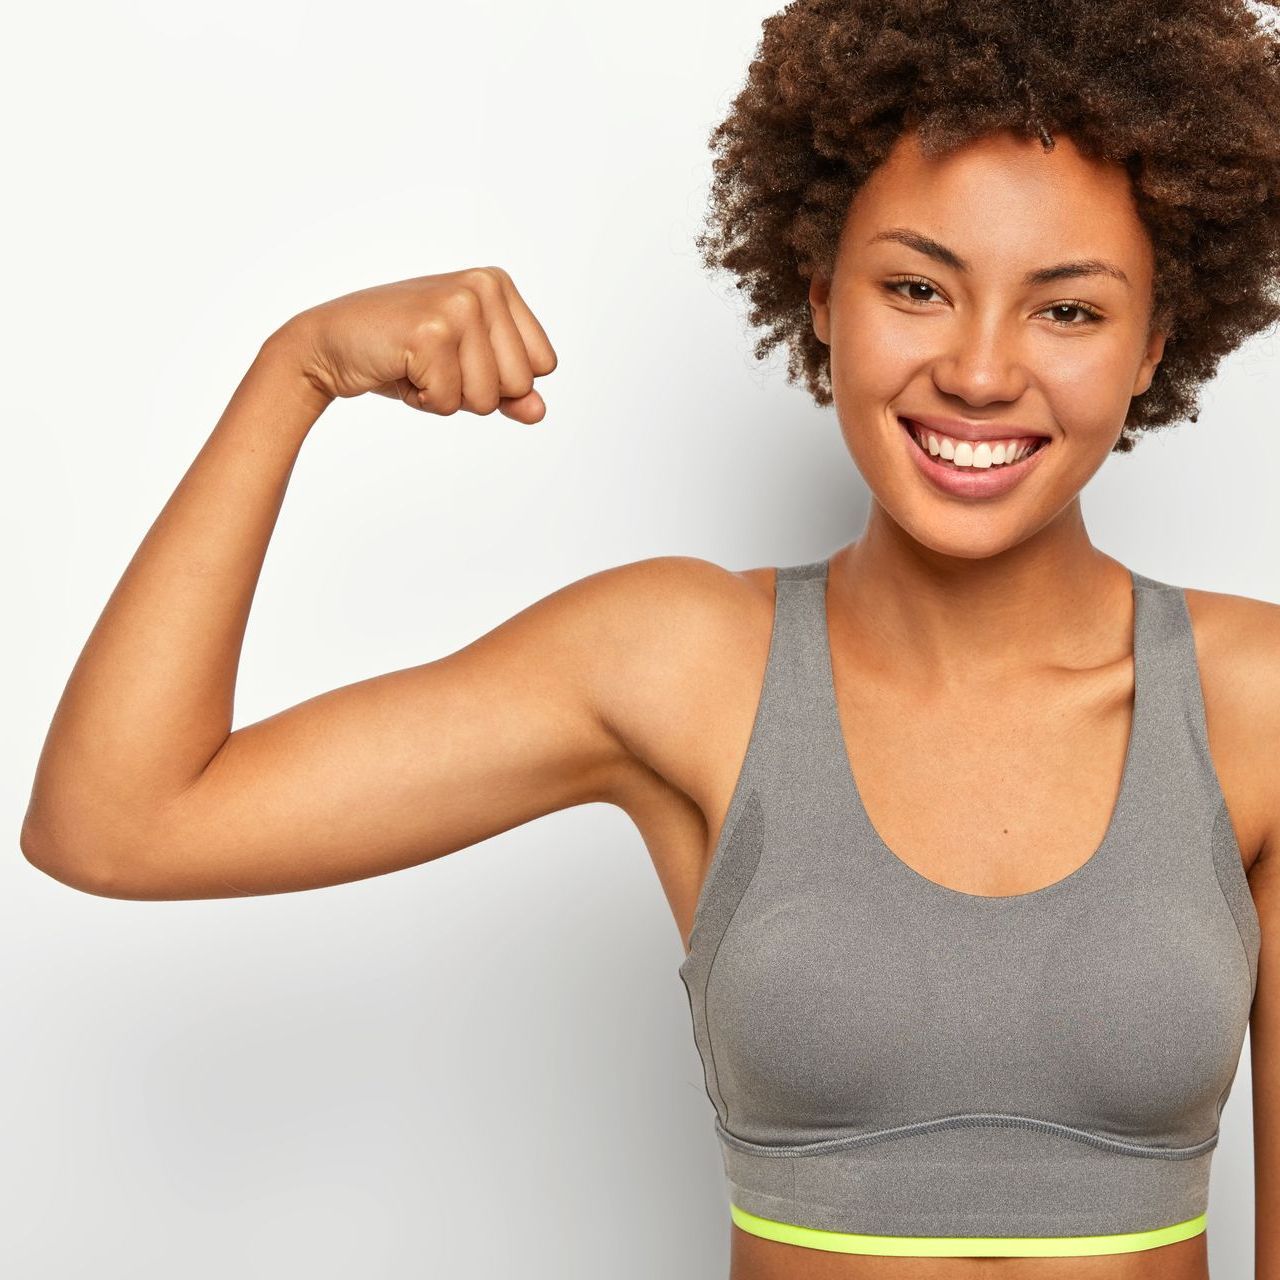 a woman in a gray sports bra is smiling and flexing her arm